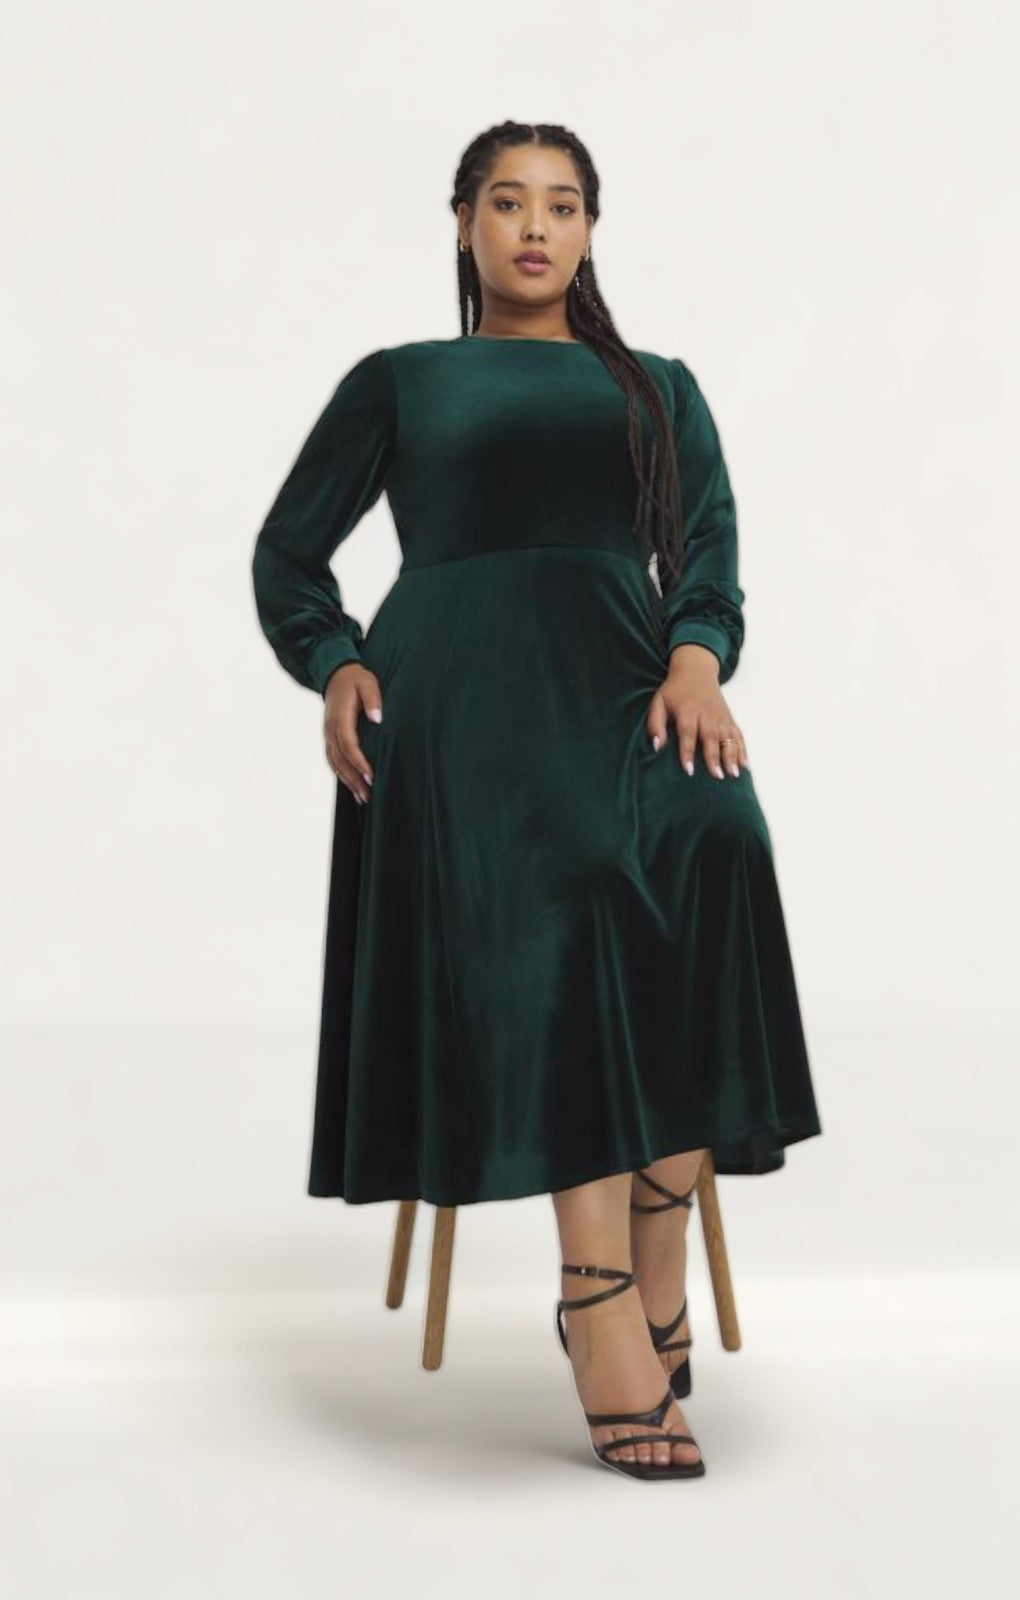 Simply Be Etta Velour Dress product image